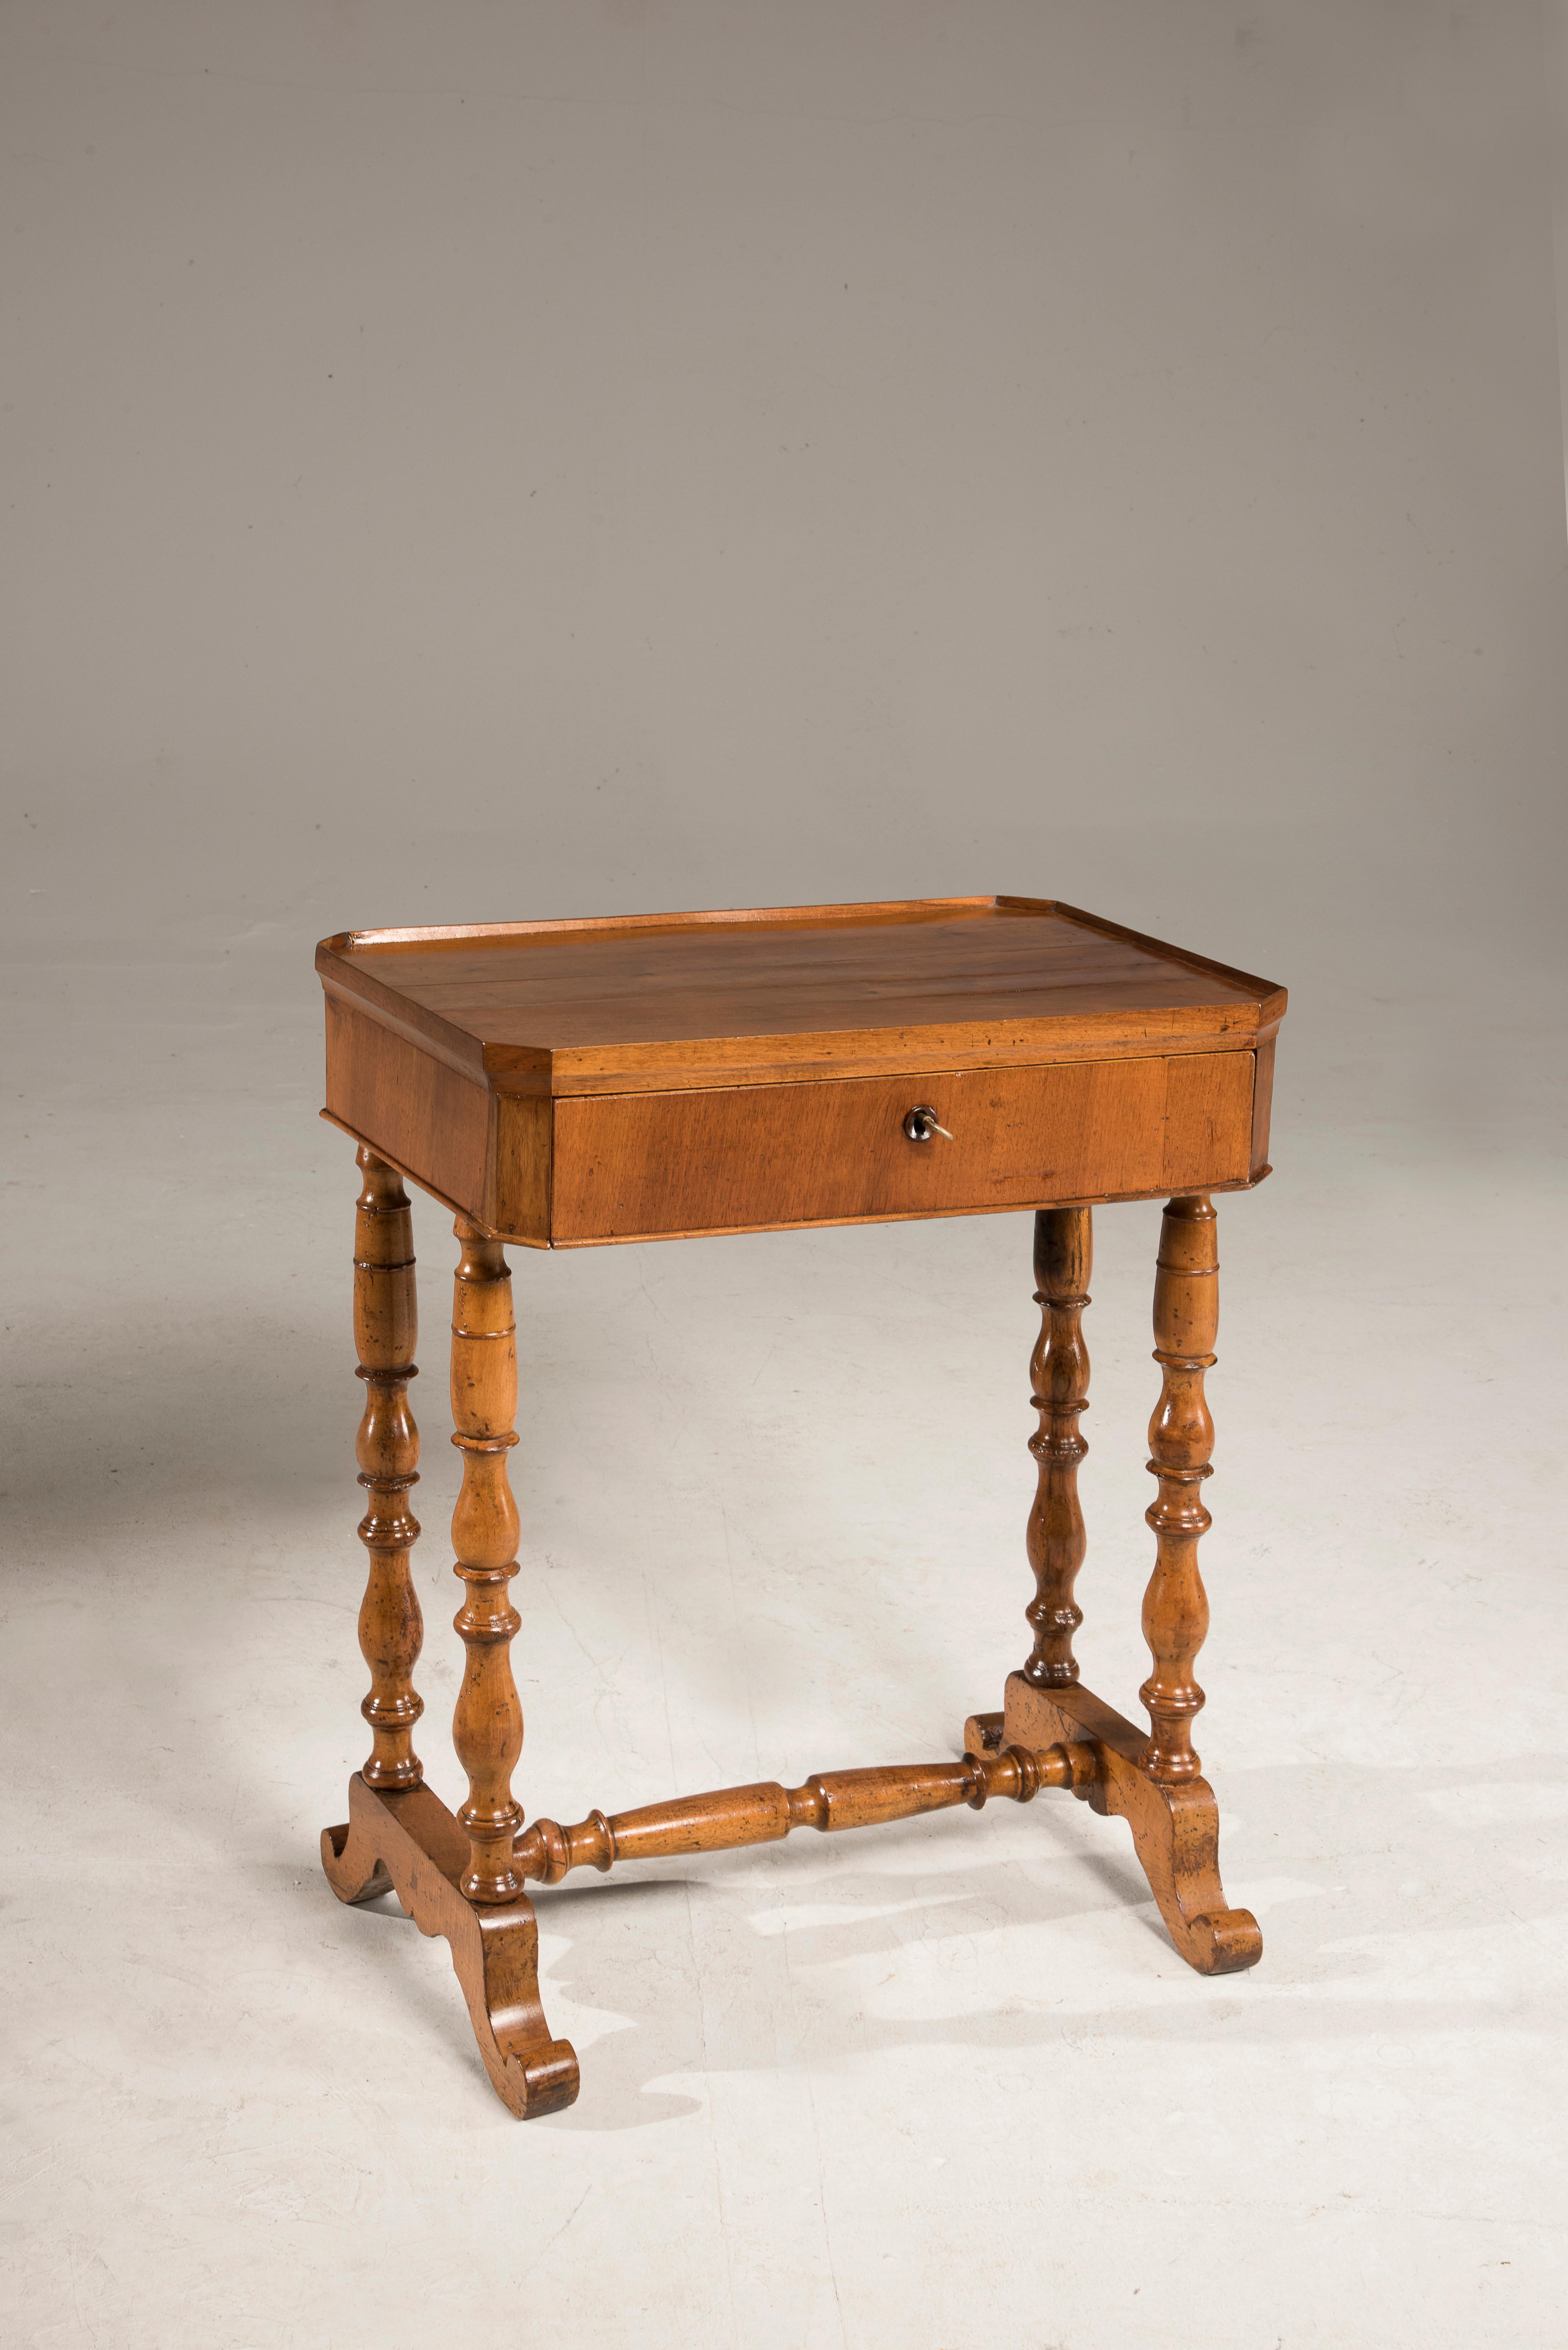 Mid-19th century work table in walnut. Restored in a conservative way. Measures 39 x 59 x H 72 cm.